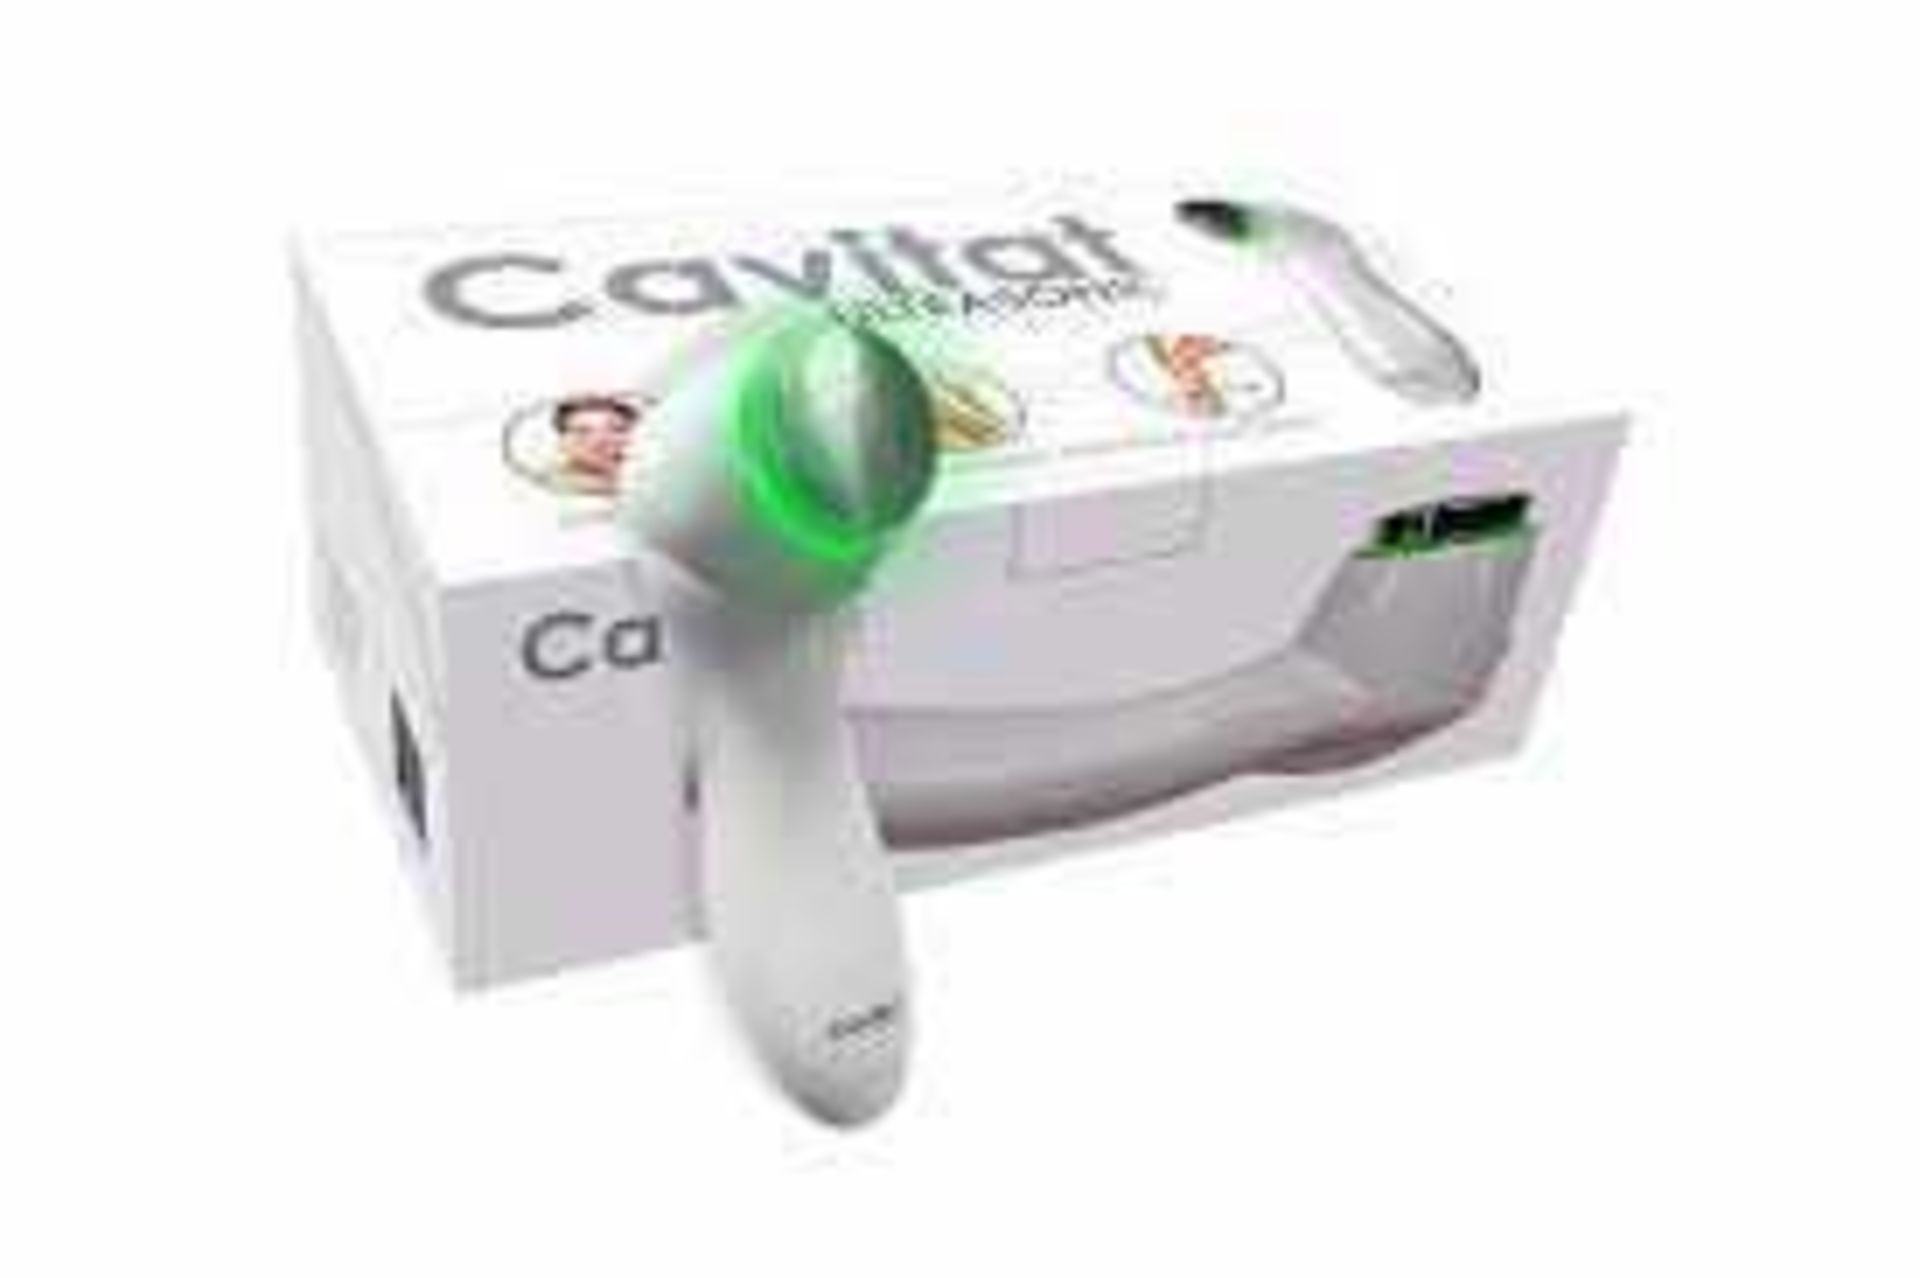 Combined RRP £180 Lot To Contain 2 Brand New Cavitat Ultrasonic Smoothing Beauty Treatment For Face